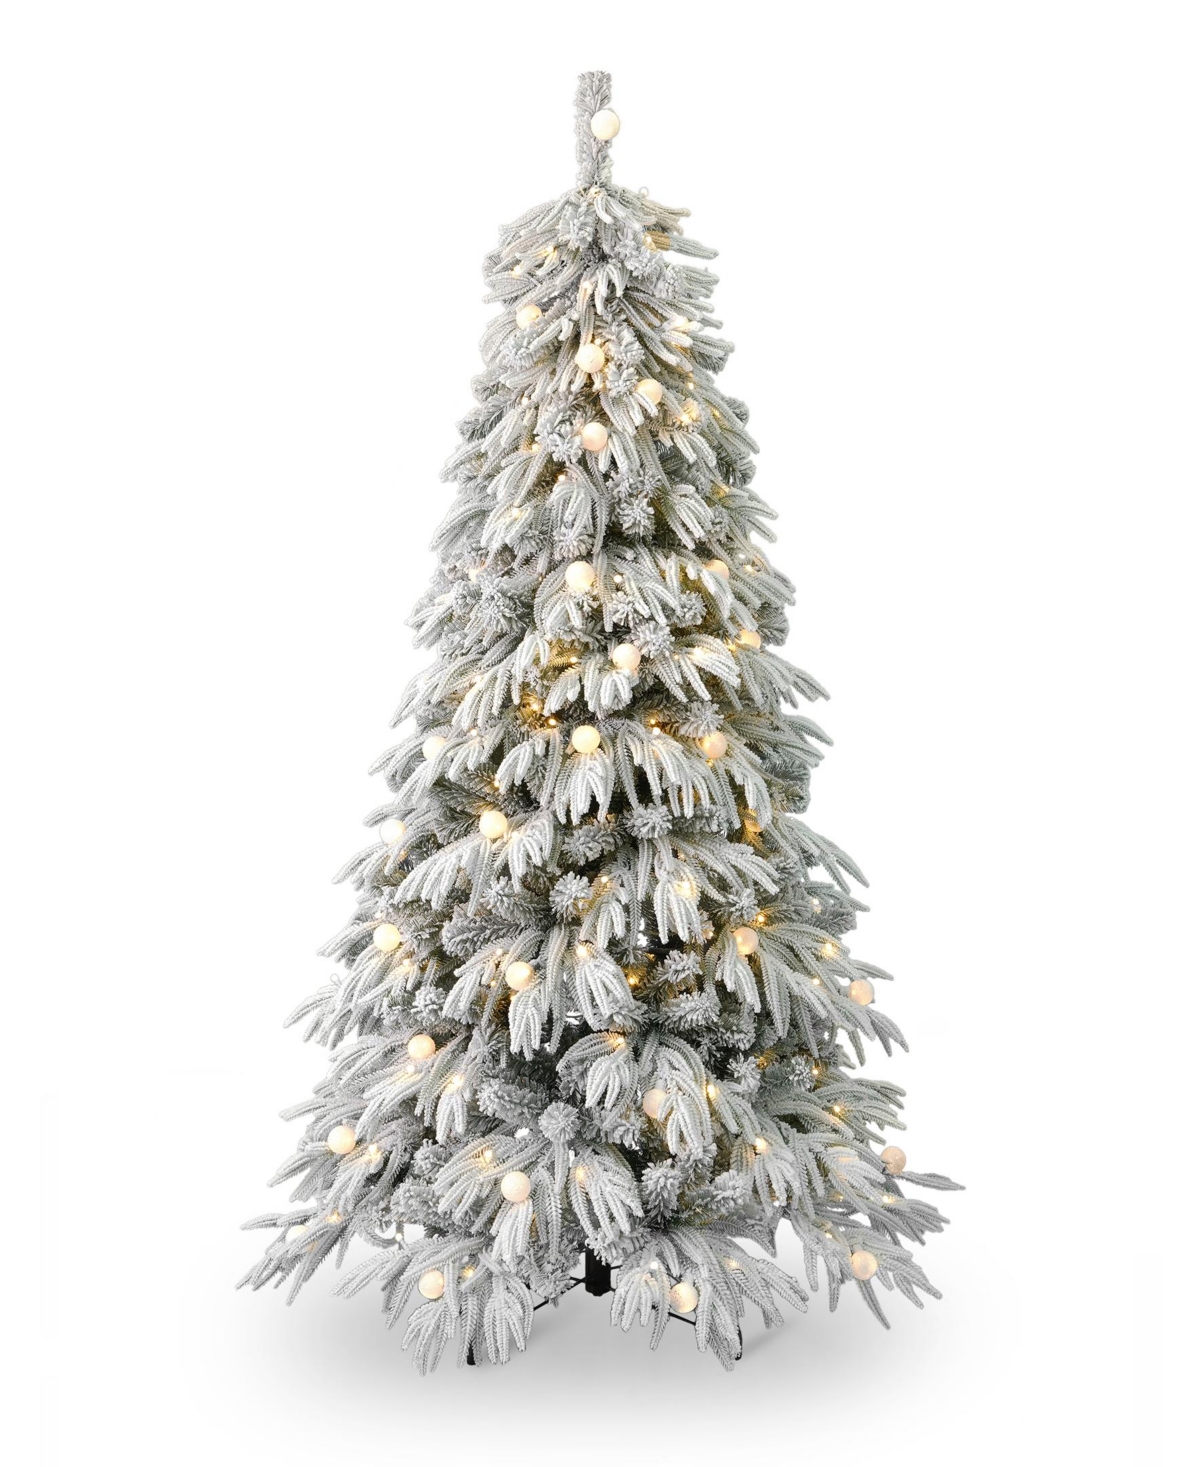 Seasonal Frosted Acadia 6.5' Pre-lit Flocked Pe Mixed Pvc Full Tree With Metal Stand, 2409 Tips, 300 Changing In White